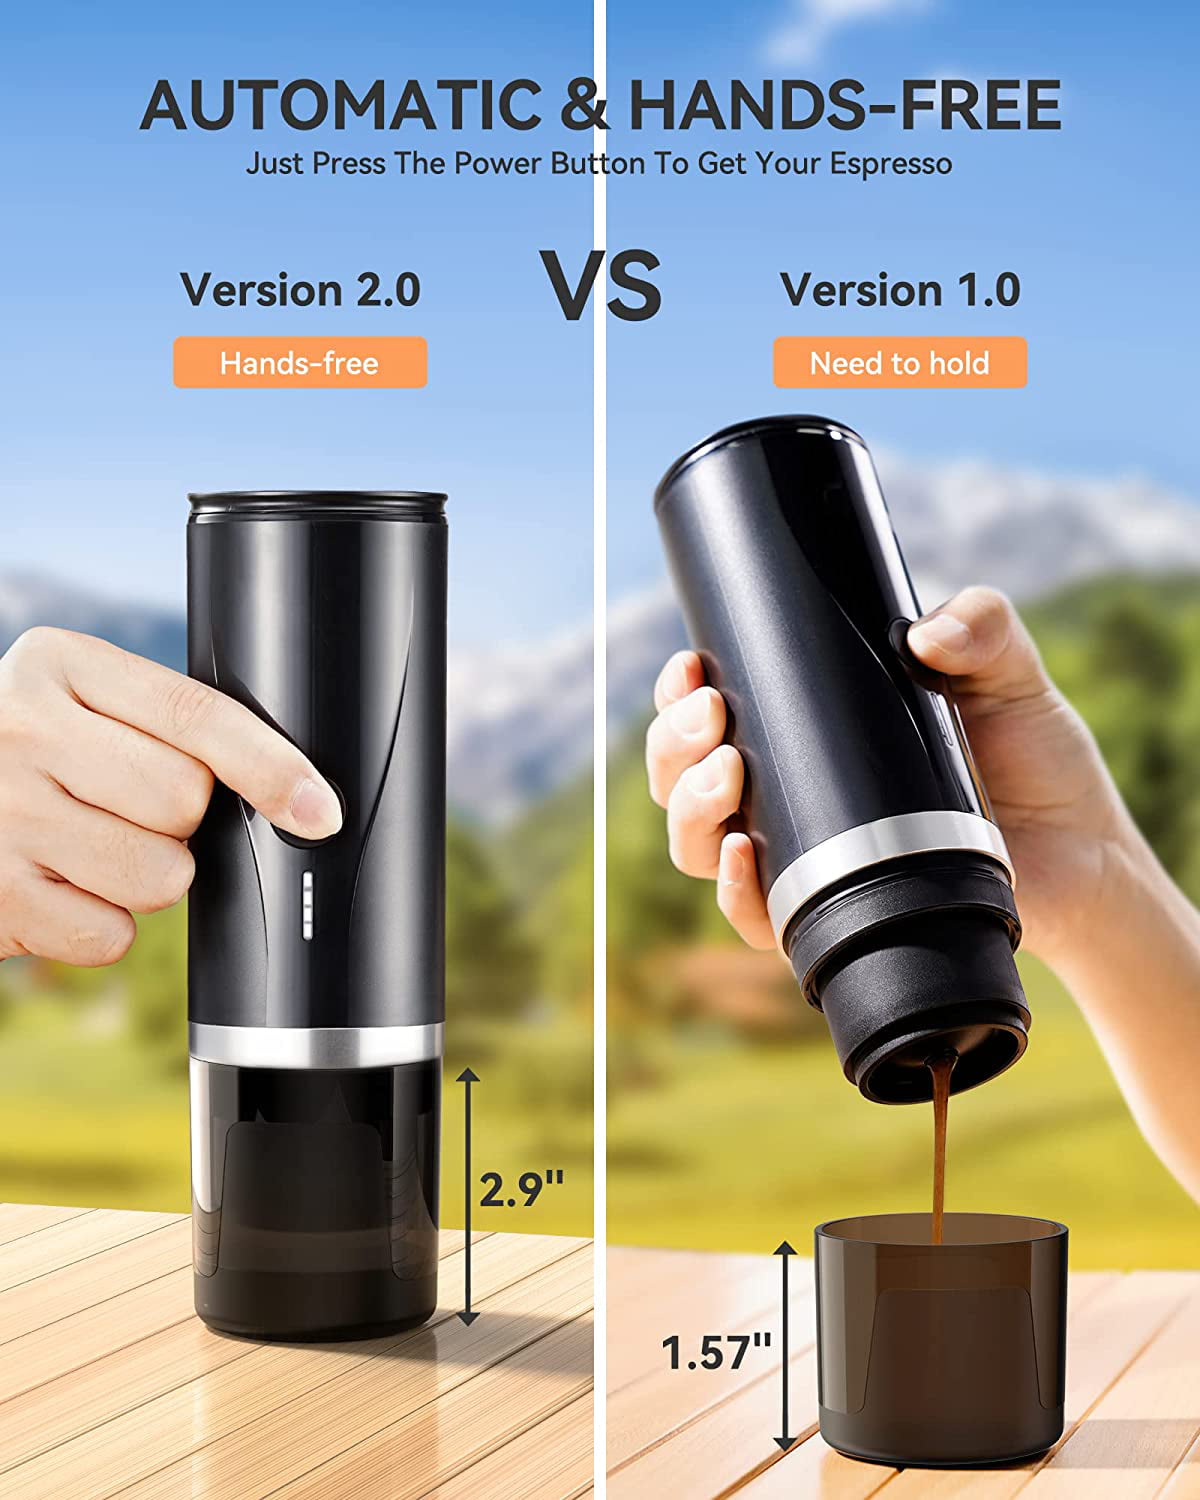 MIUI Small Portable Espresso Machine Lightweight DC12V Travel Travel Coffee  Maker For Car, Outdoors, Camping, And Backpacking From Galaxytoys, $743.08